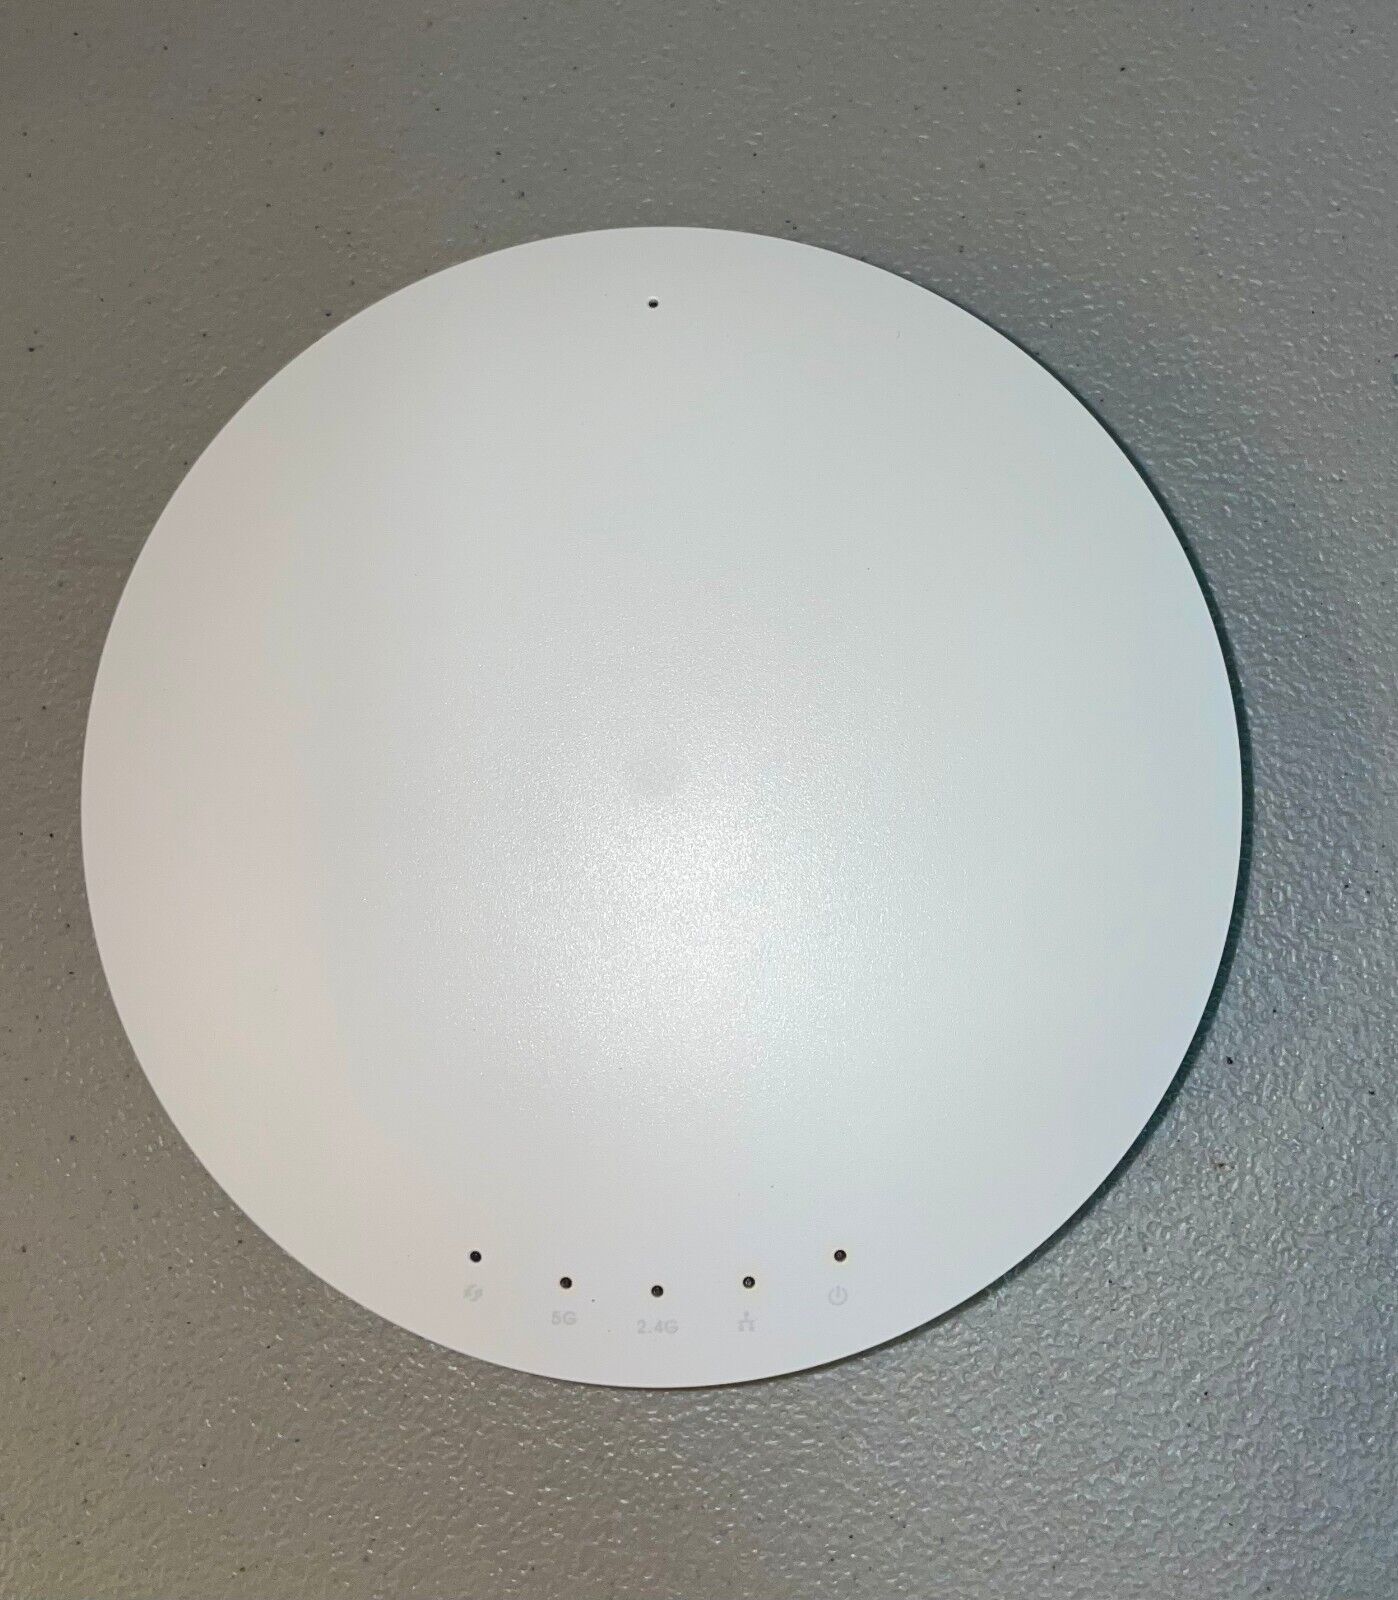 Open-Mesh MR-1750 Dual Band Wireless-AC Access Point